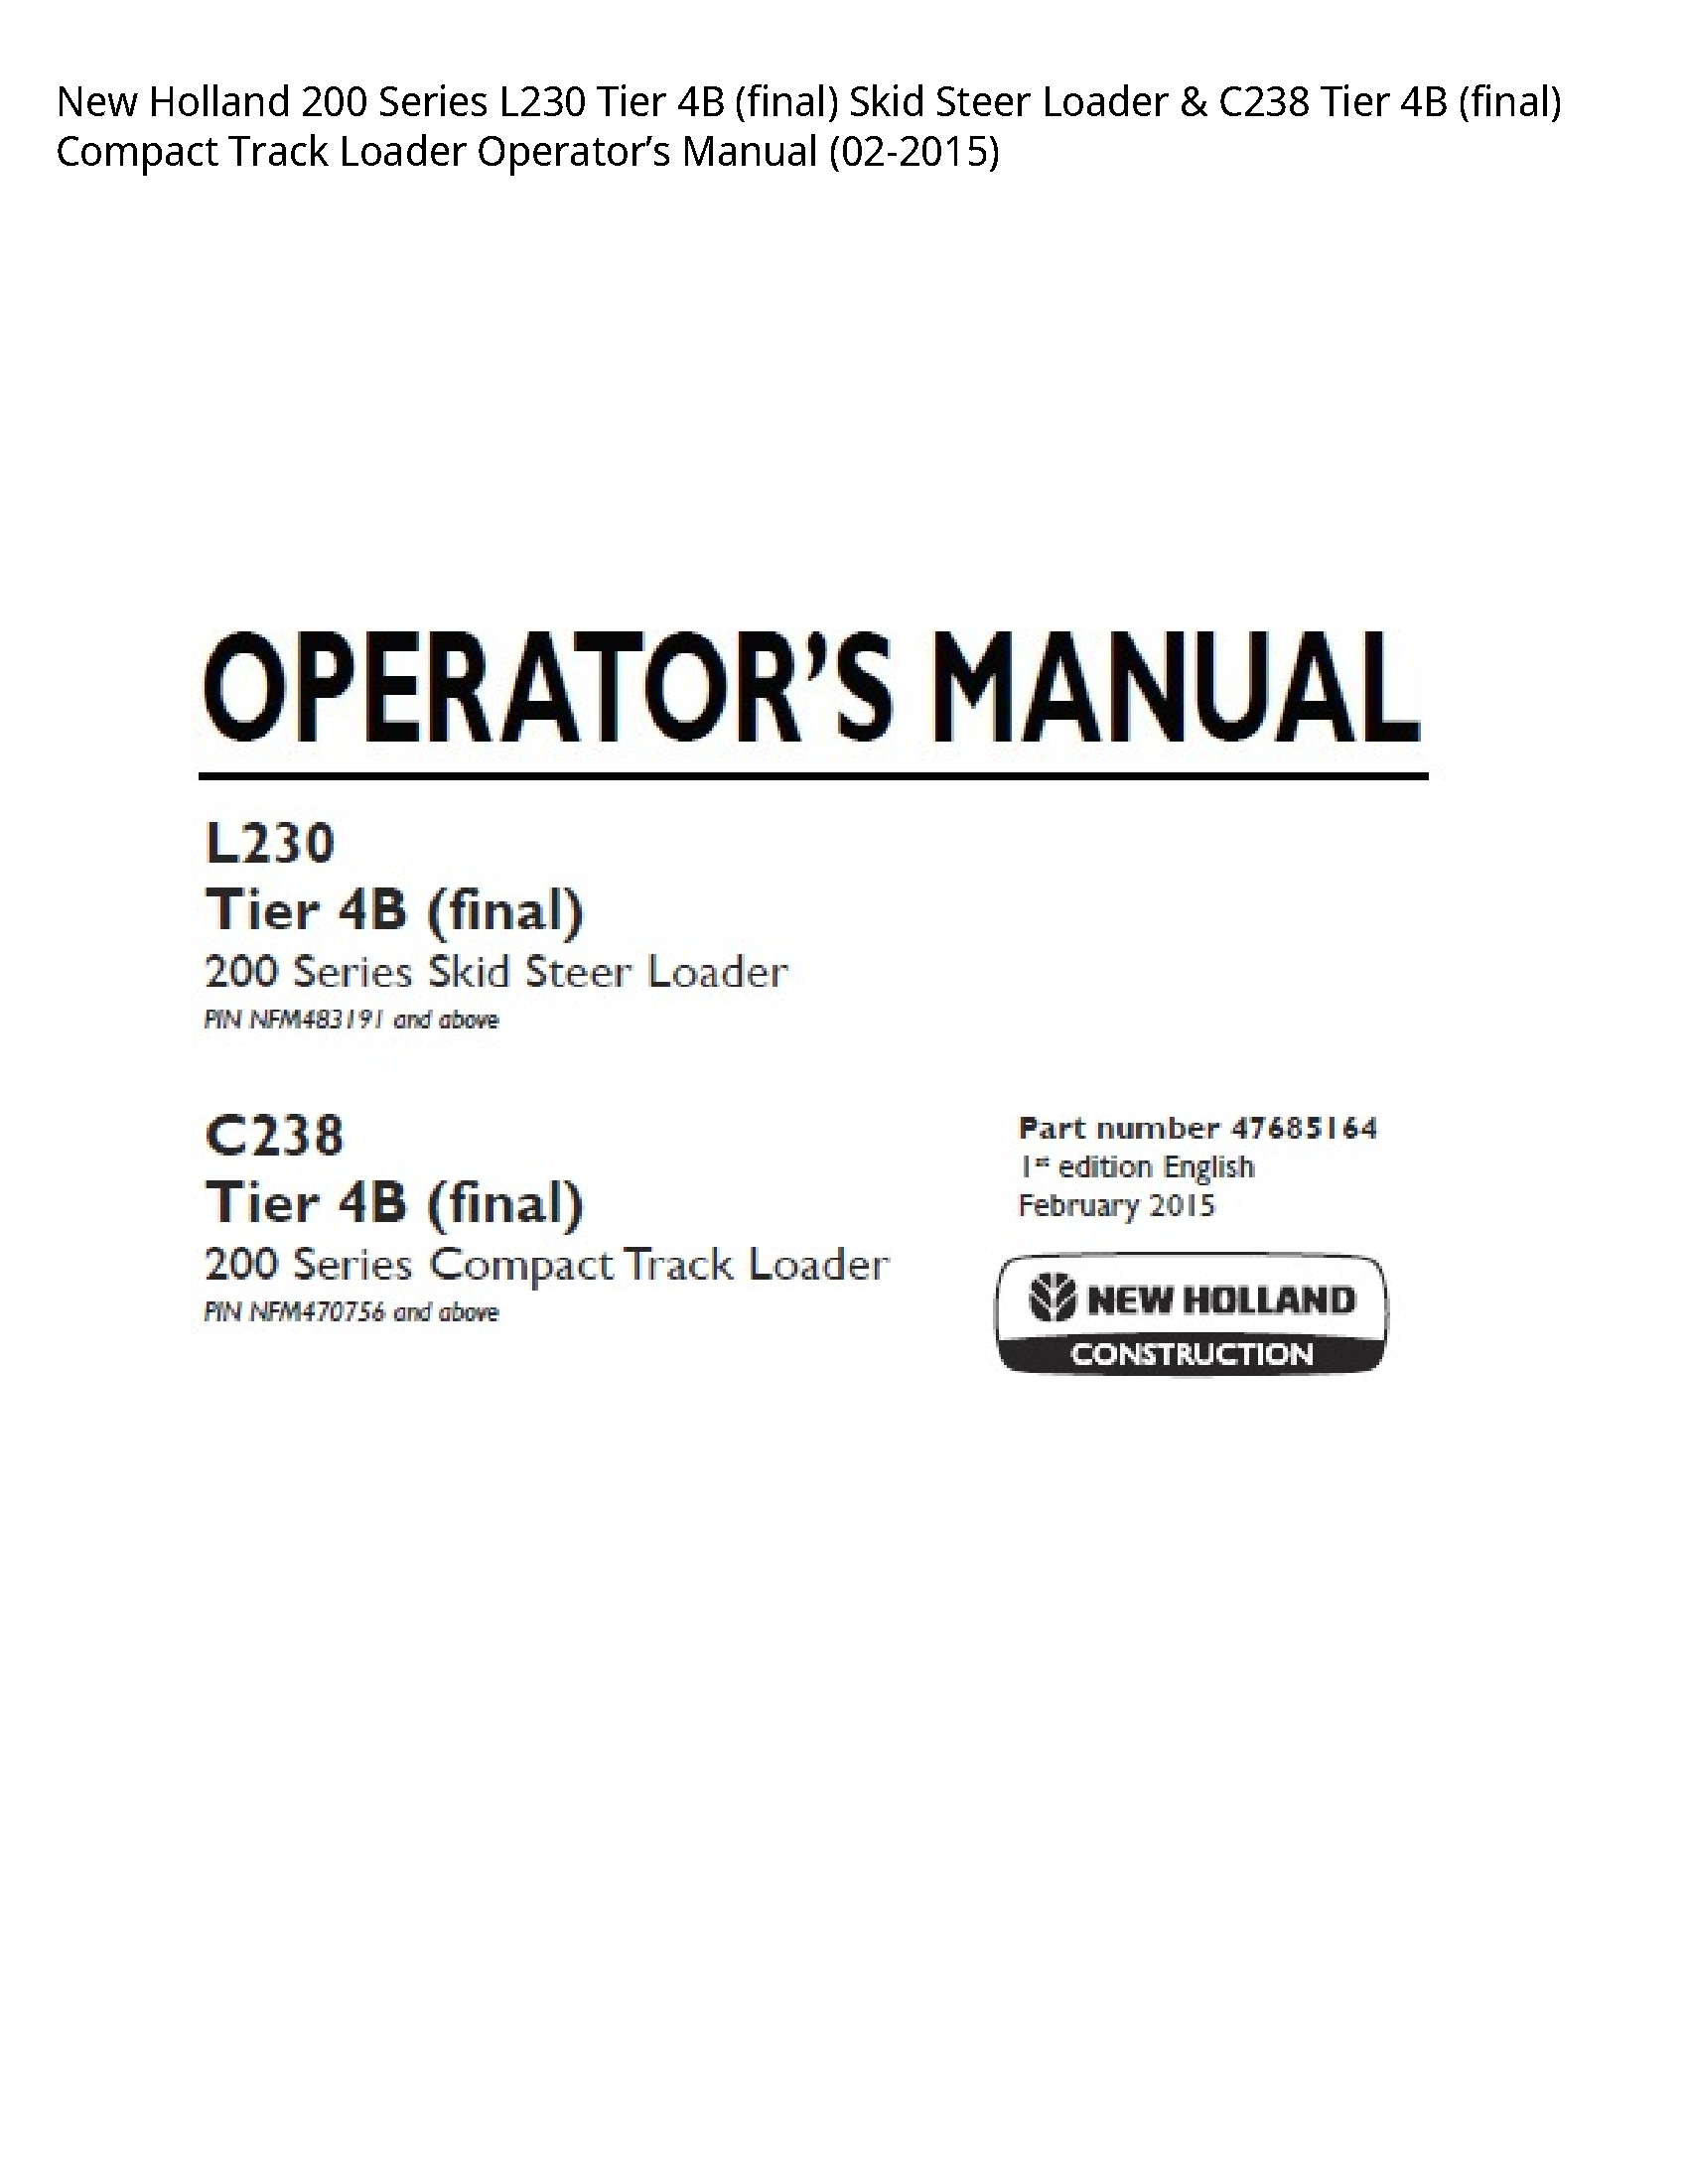 New Holland 200 Series Tier (final) Skid Steer Loader Tier (final) Compact Track Loader Operator’s manual